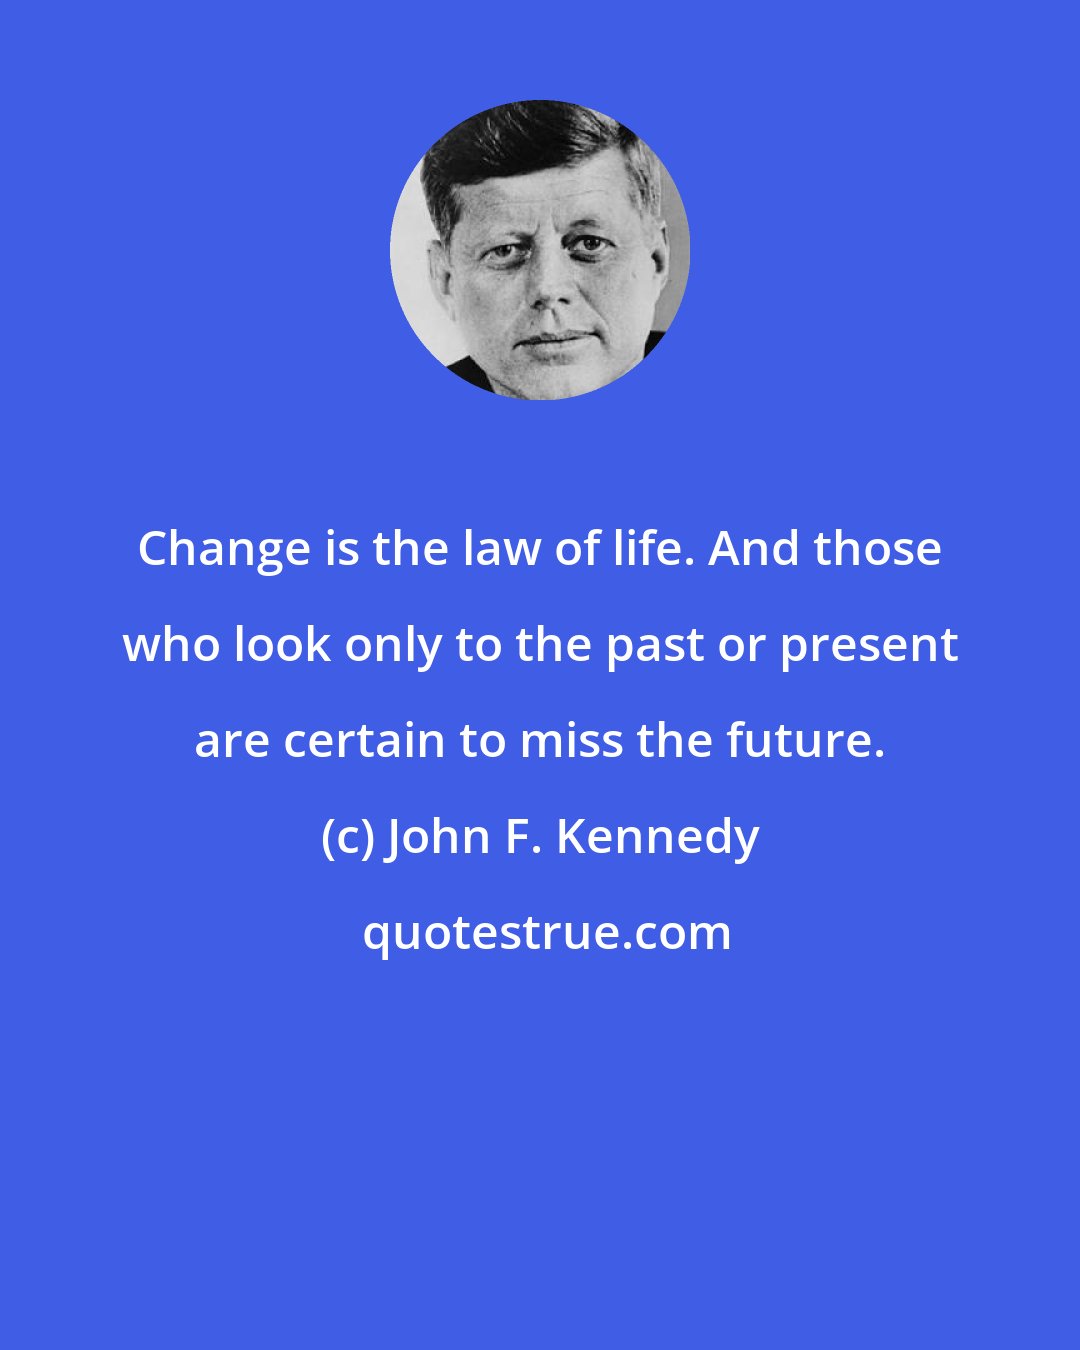 John F. Kennedy: Change is the law of life. And those who look only to the past or present are certain to miss the future.